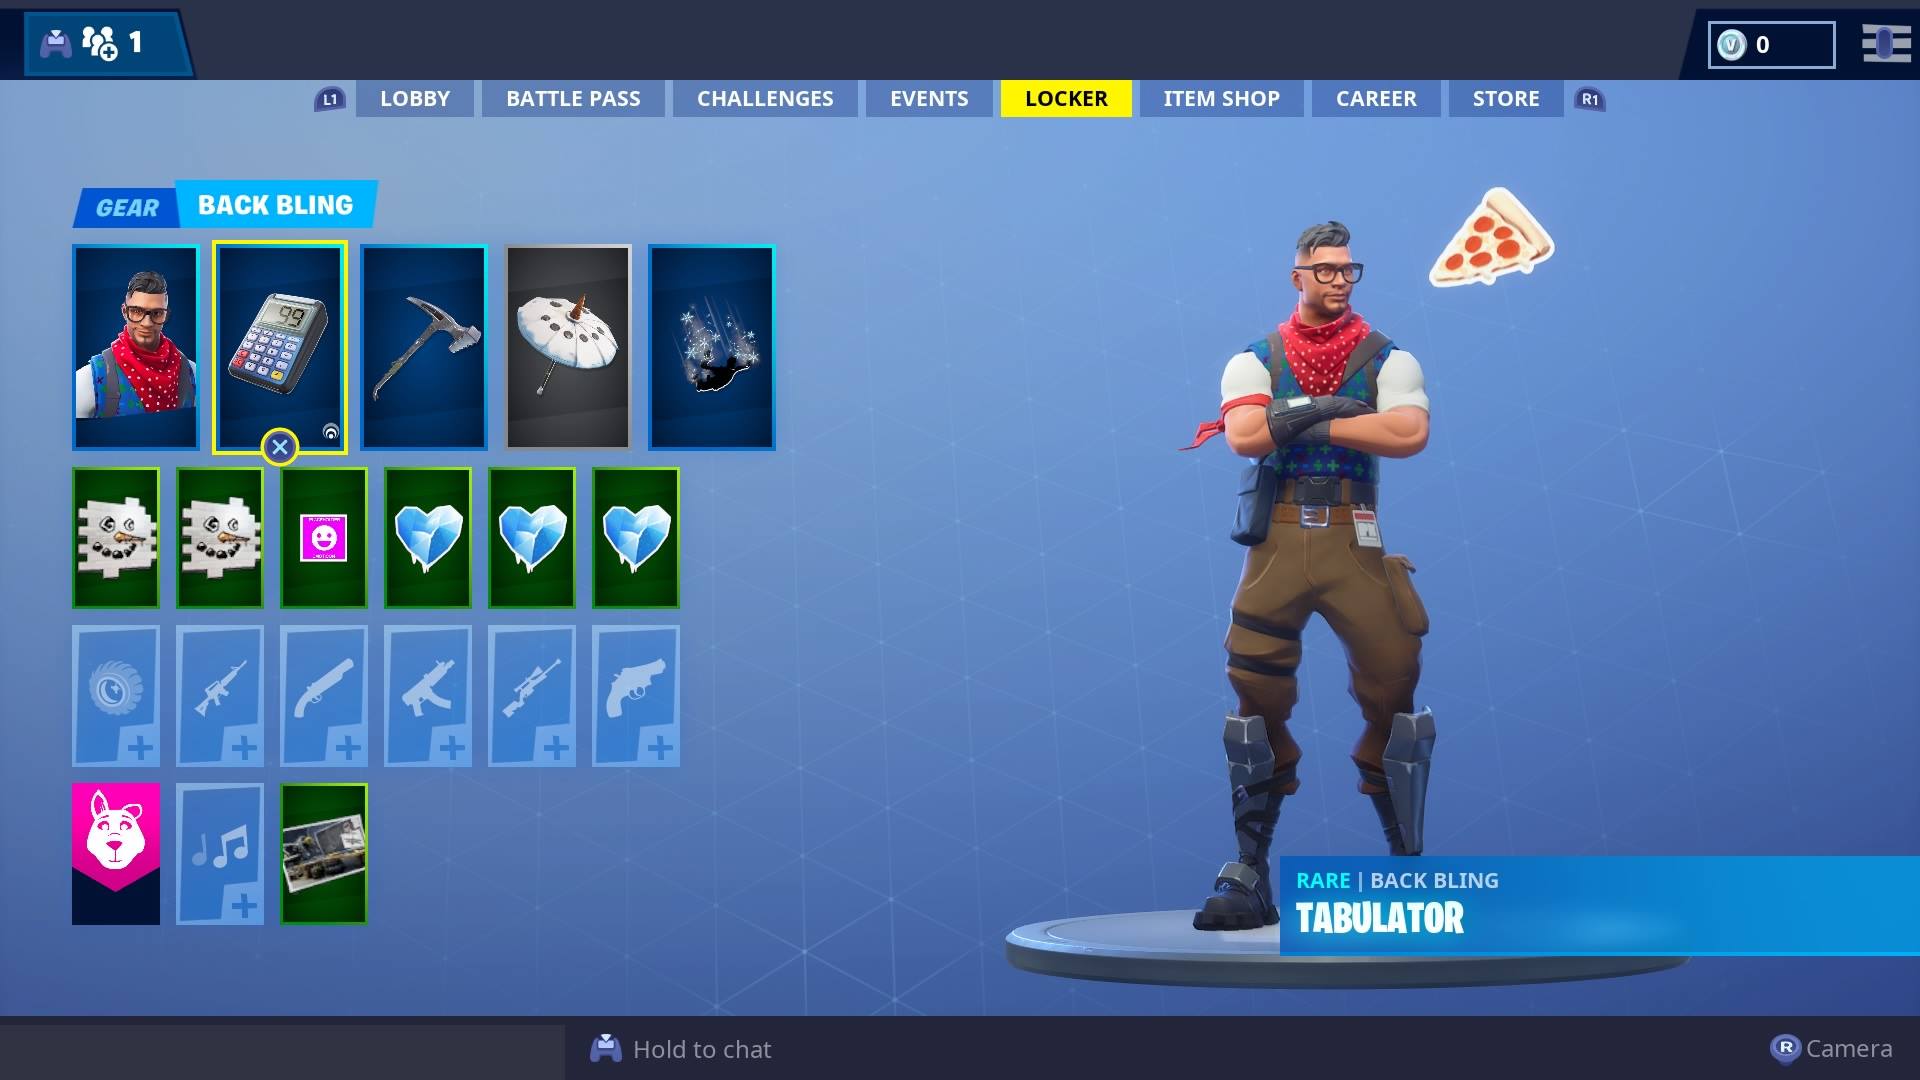 Playstation Plus Players Can Get A Skin Back Bling And